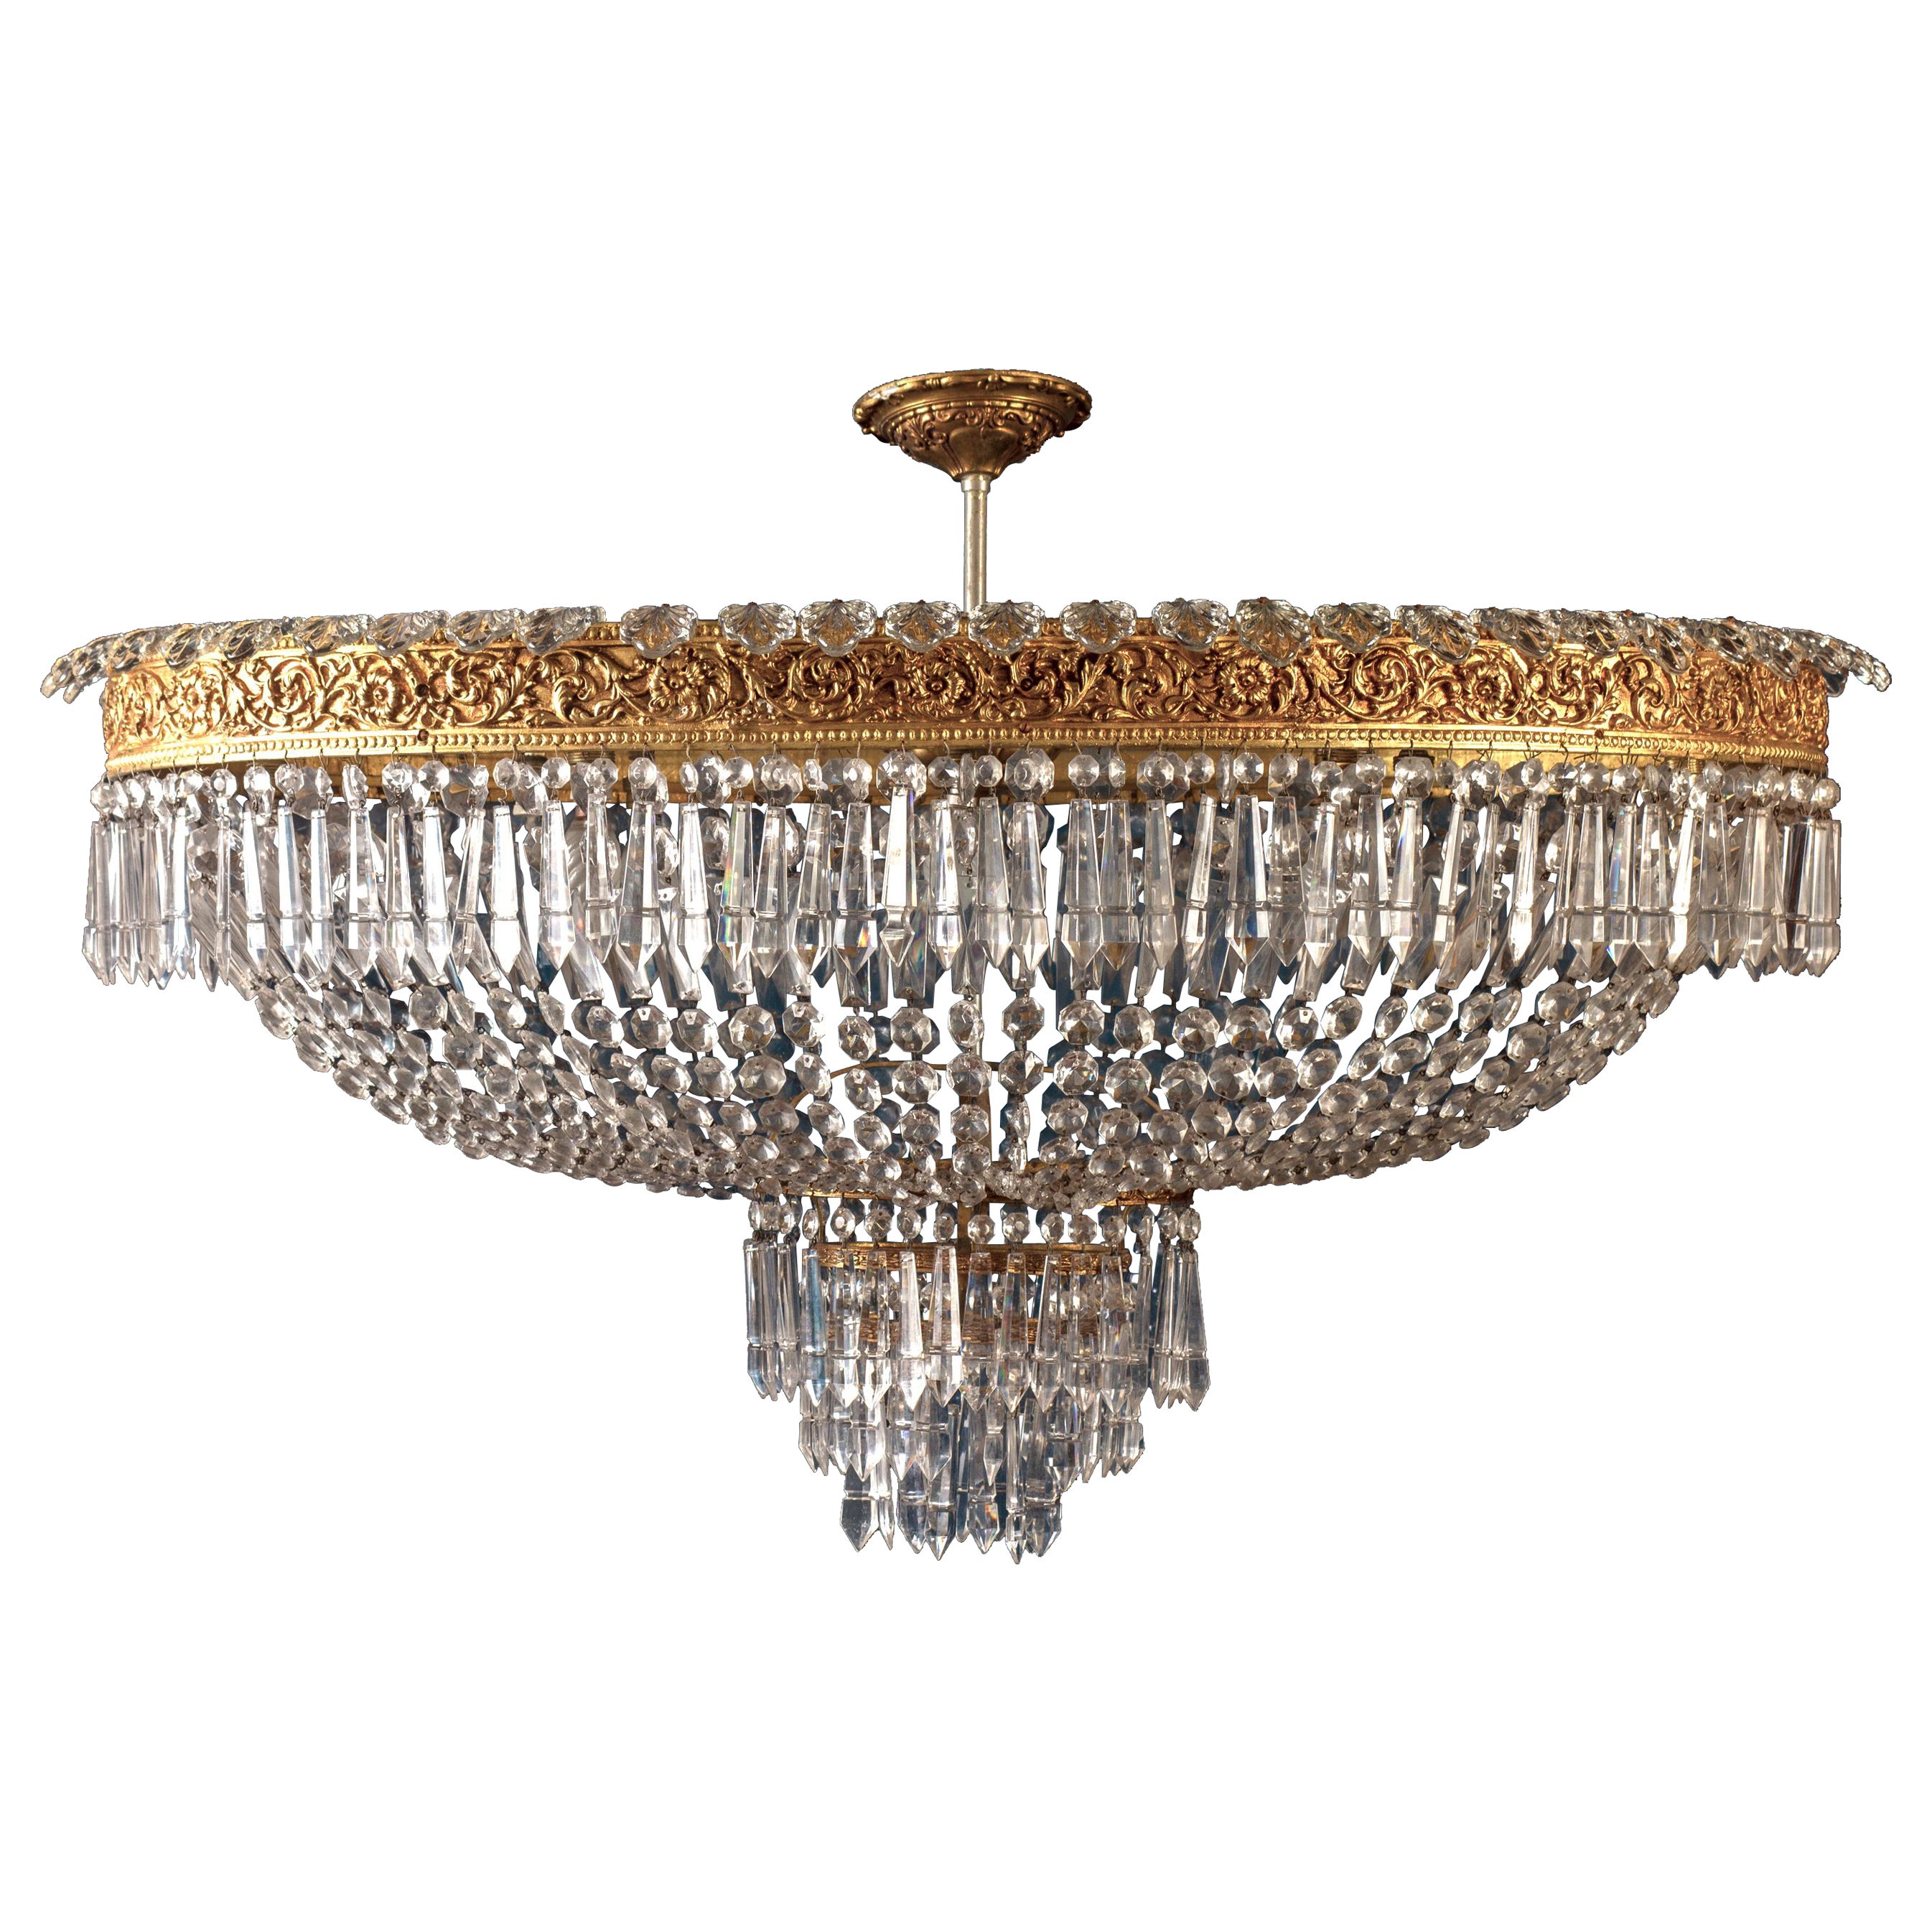 Luxurious Oval Shaped Crystal and Brass Chandelier, Italy, 1940 For Sale